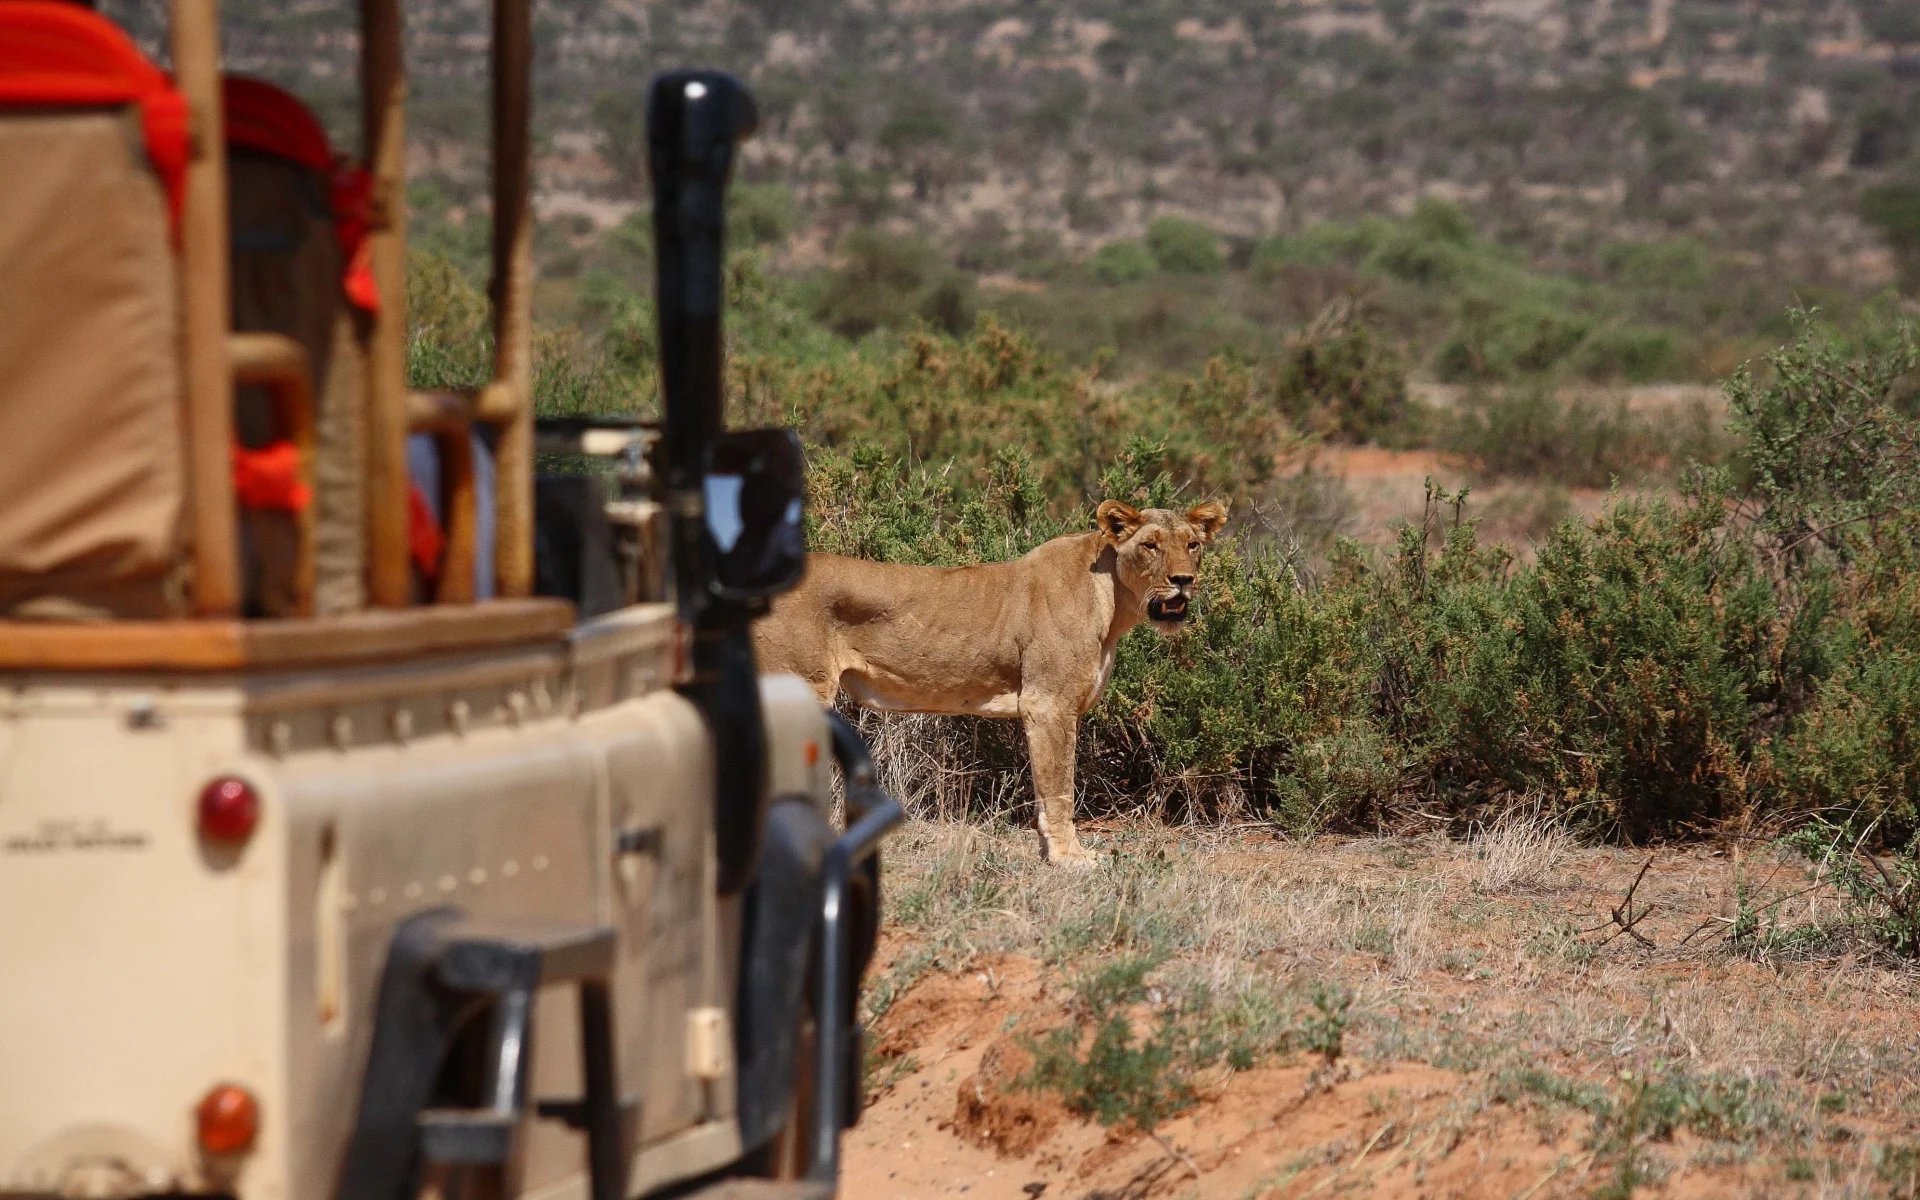 A lion is standing in front of a safari vehicle.